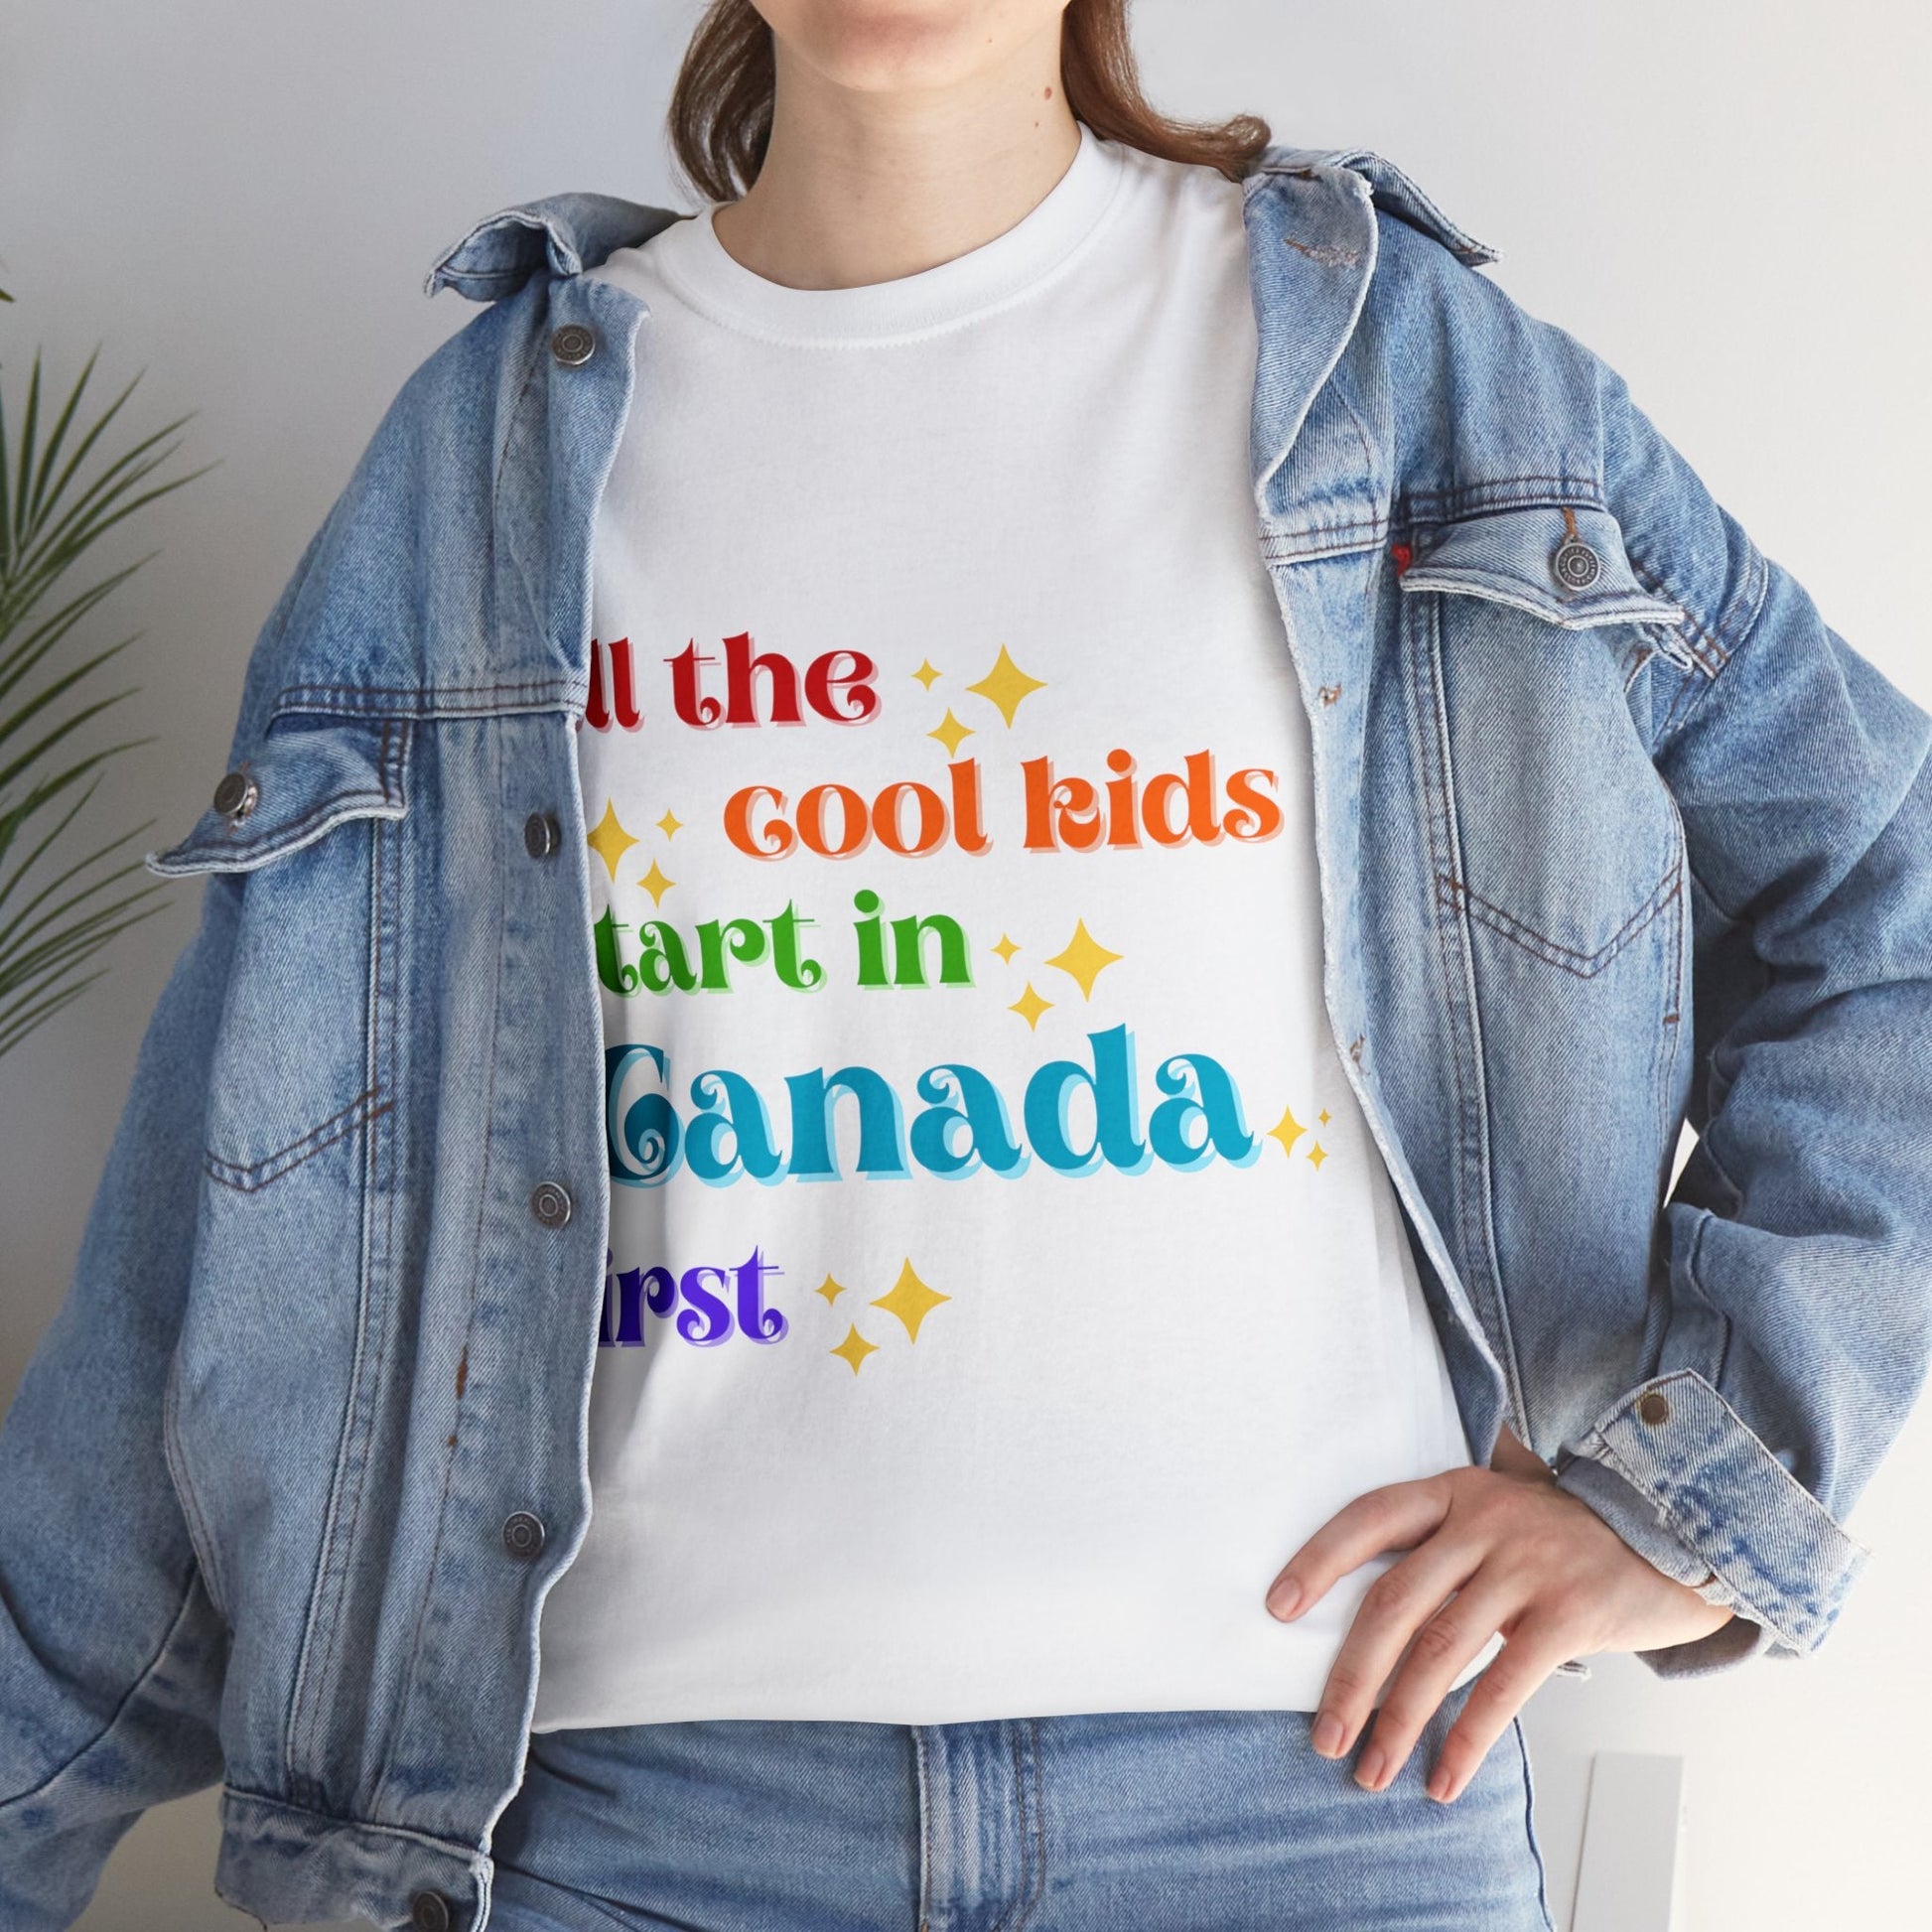 Canada First Unisex Heavy Cotton Tee adult epcot topCrew neckAdult T-ShirtWrong Lever Clothing